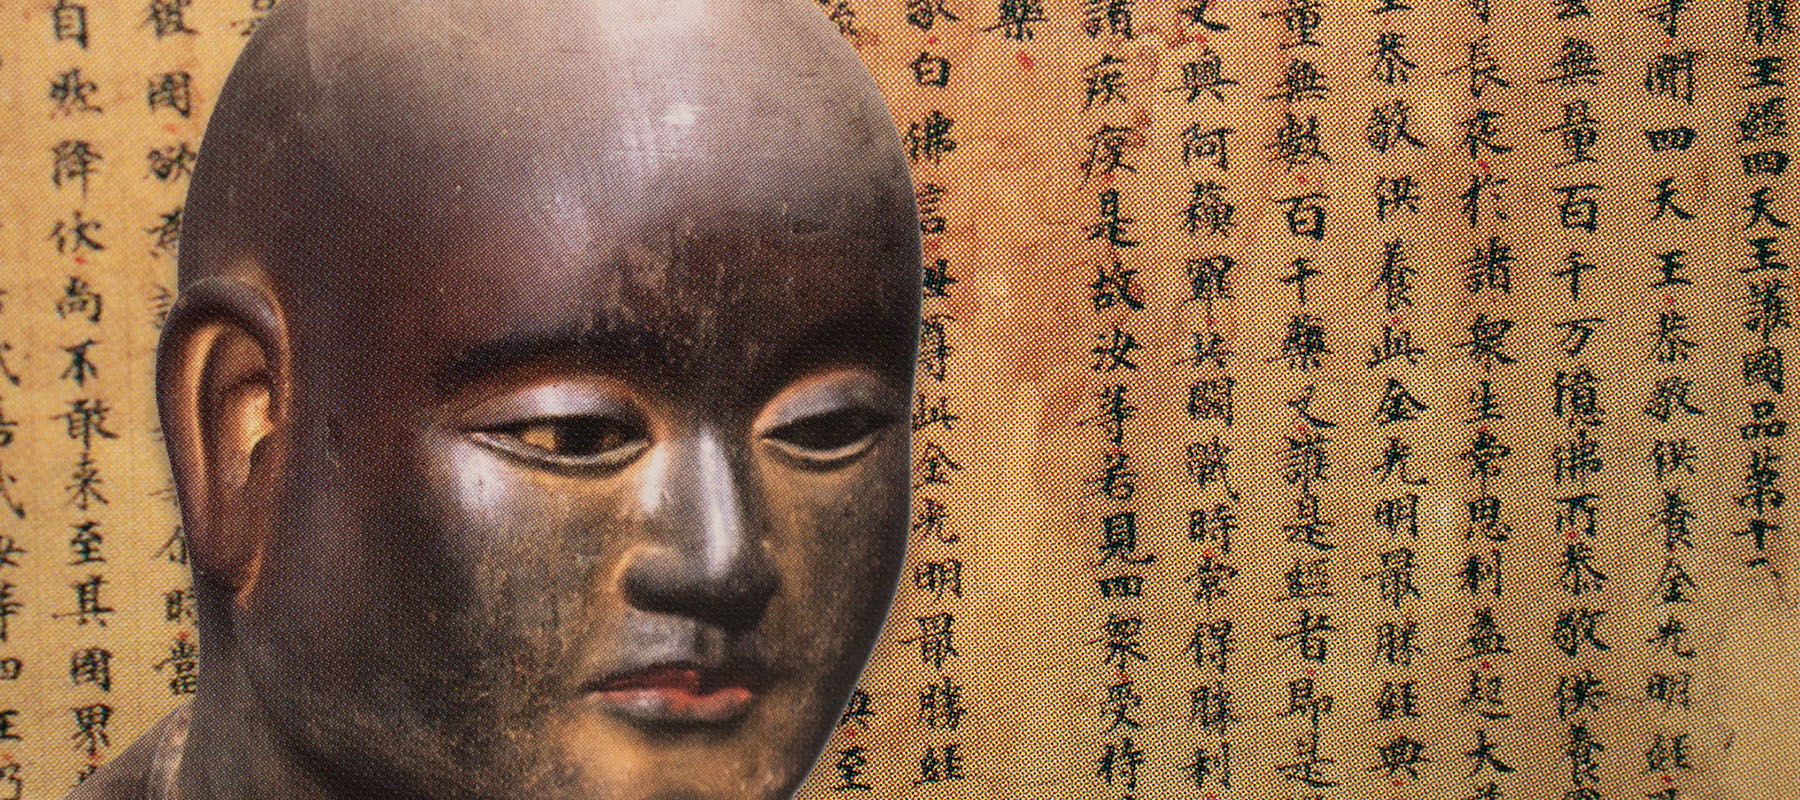 composite image of Kukai statue against calligraphy text